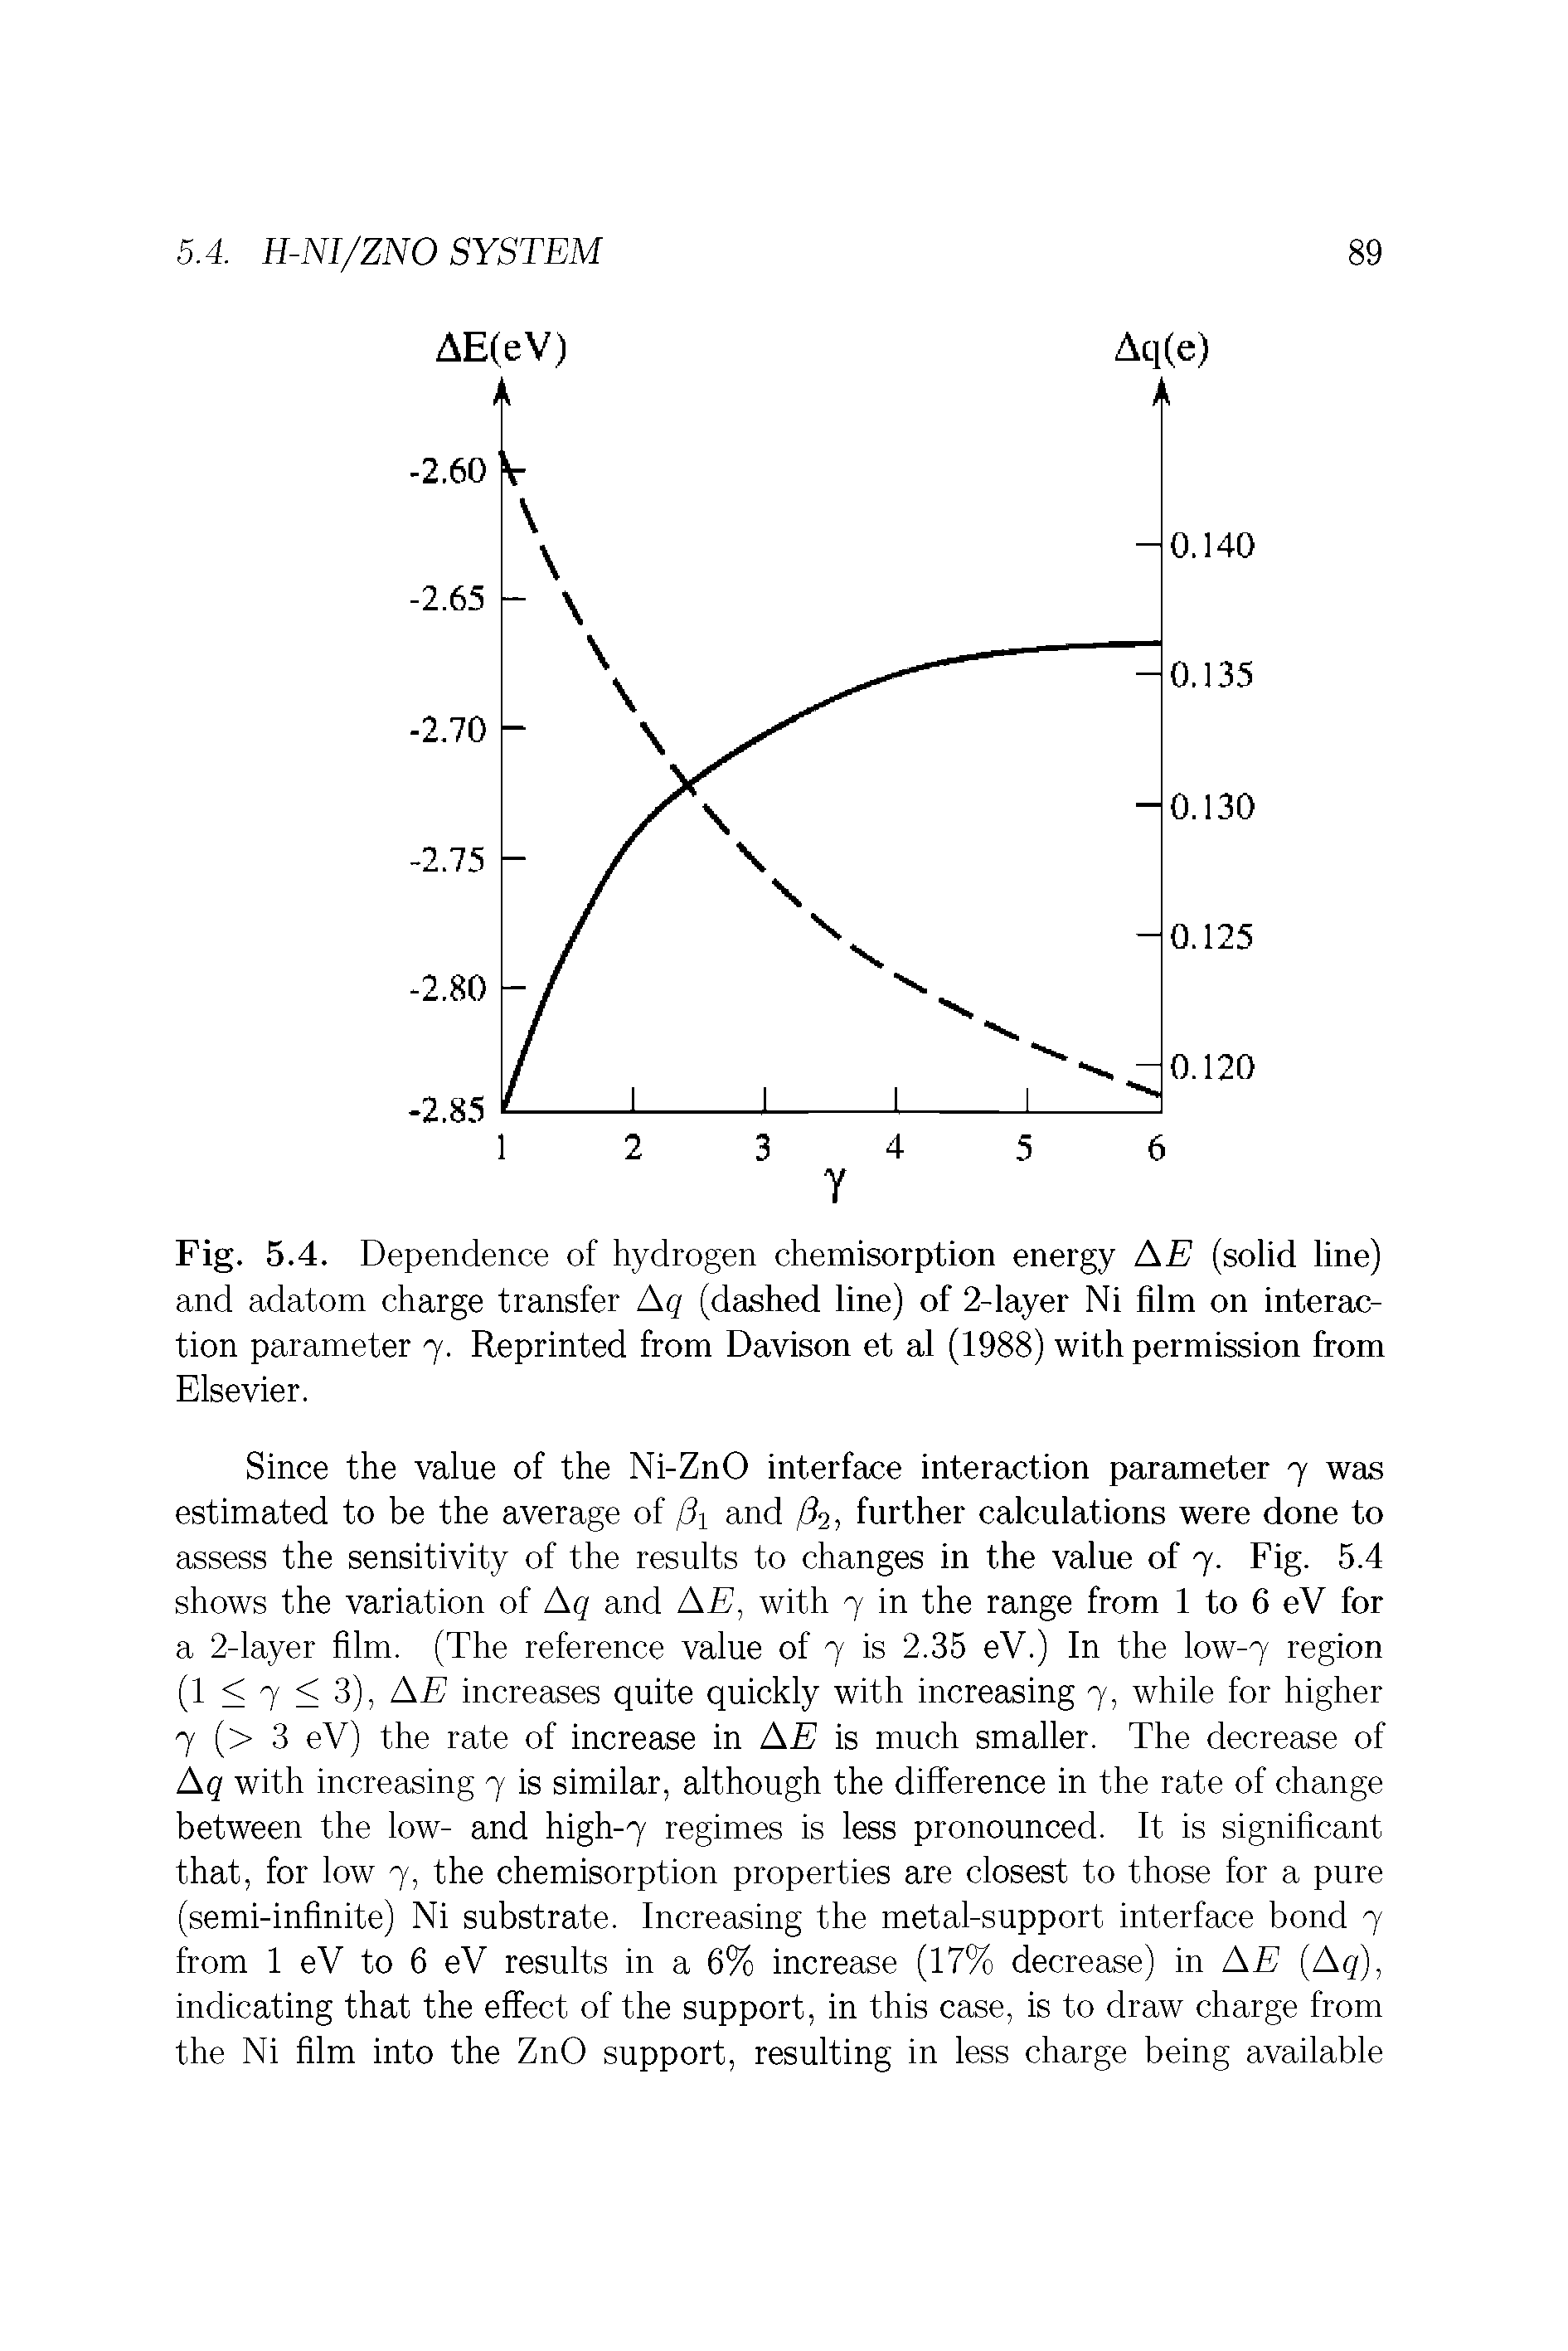 Fig. 5.4. Dependence of hydrogen chemisorption energy AE (solid line) and adatom charge transfer Aq (dashed line) of 2-layer Ni film on interaction parameter 7. Reprinted from Davison et al (1988) with permission from Elsevier.